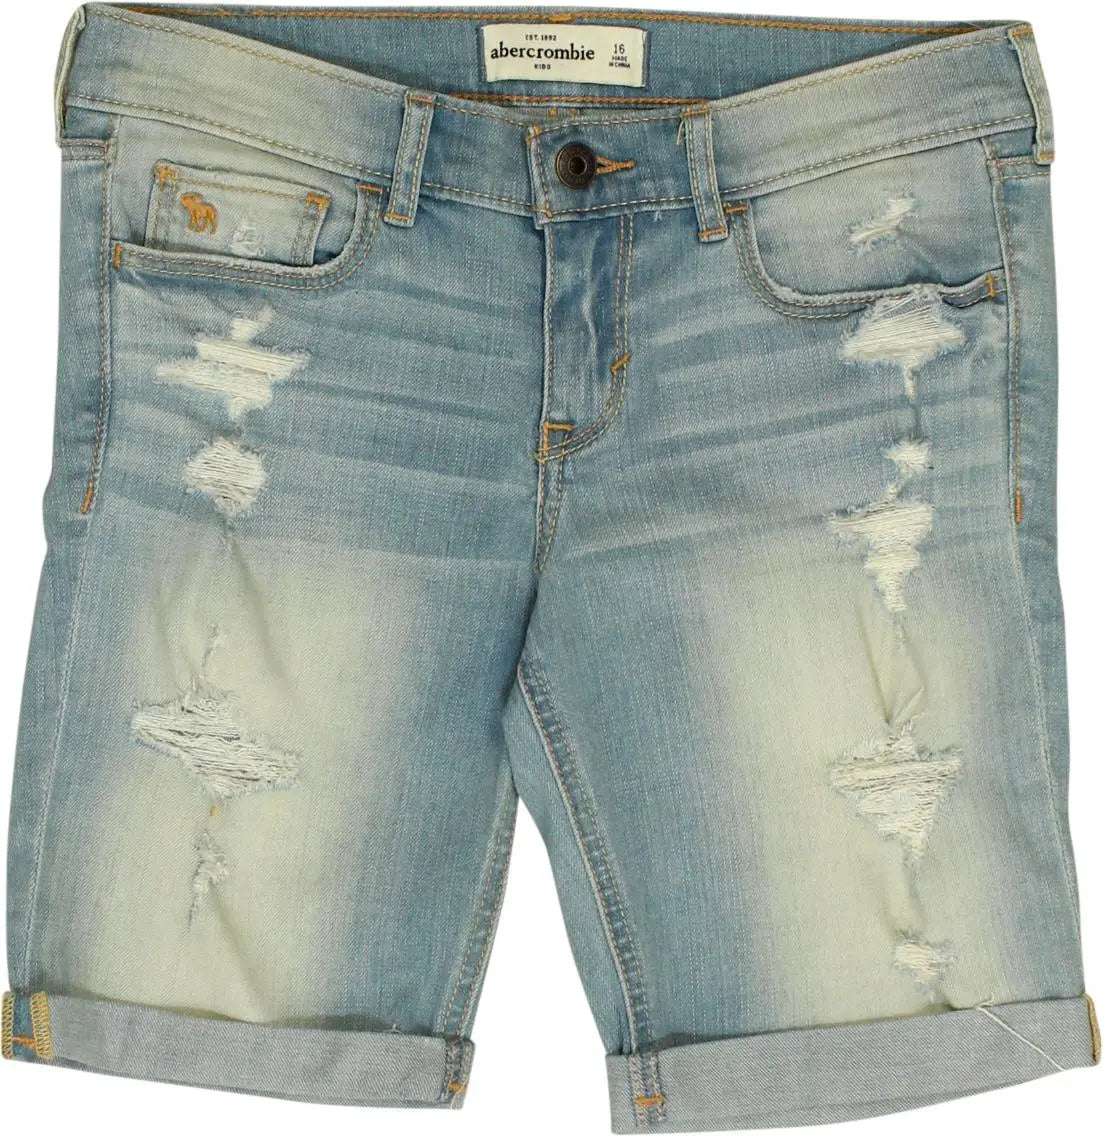 Abercrombie & Fitch - Denim Shorts- ThriftTale.com - Vintage and second handclothing